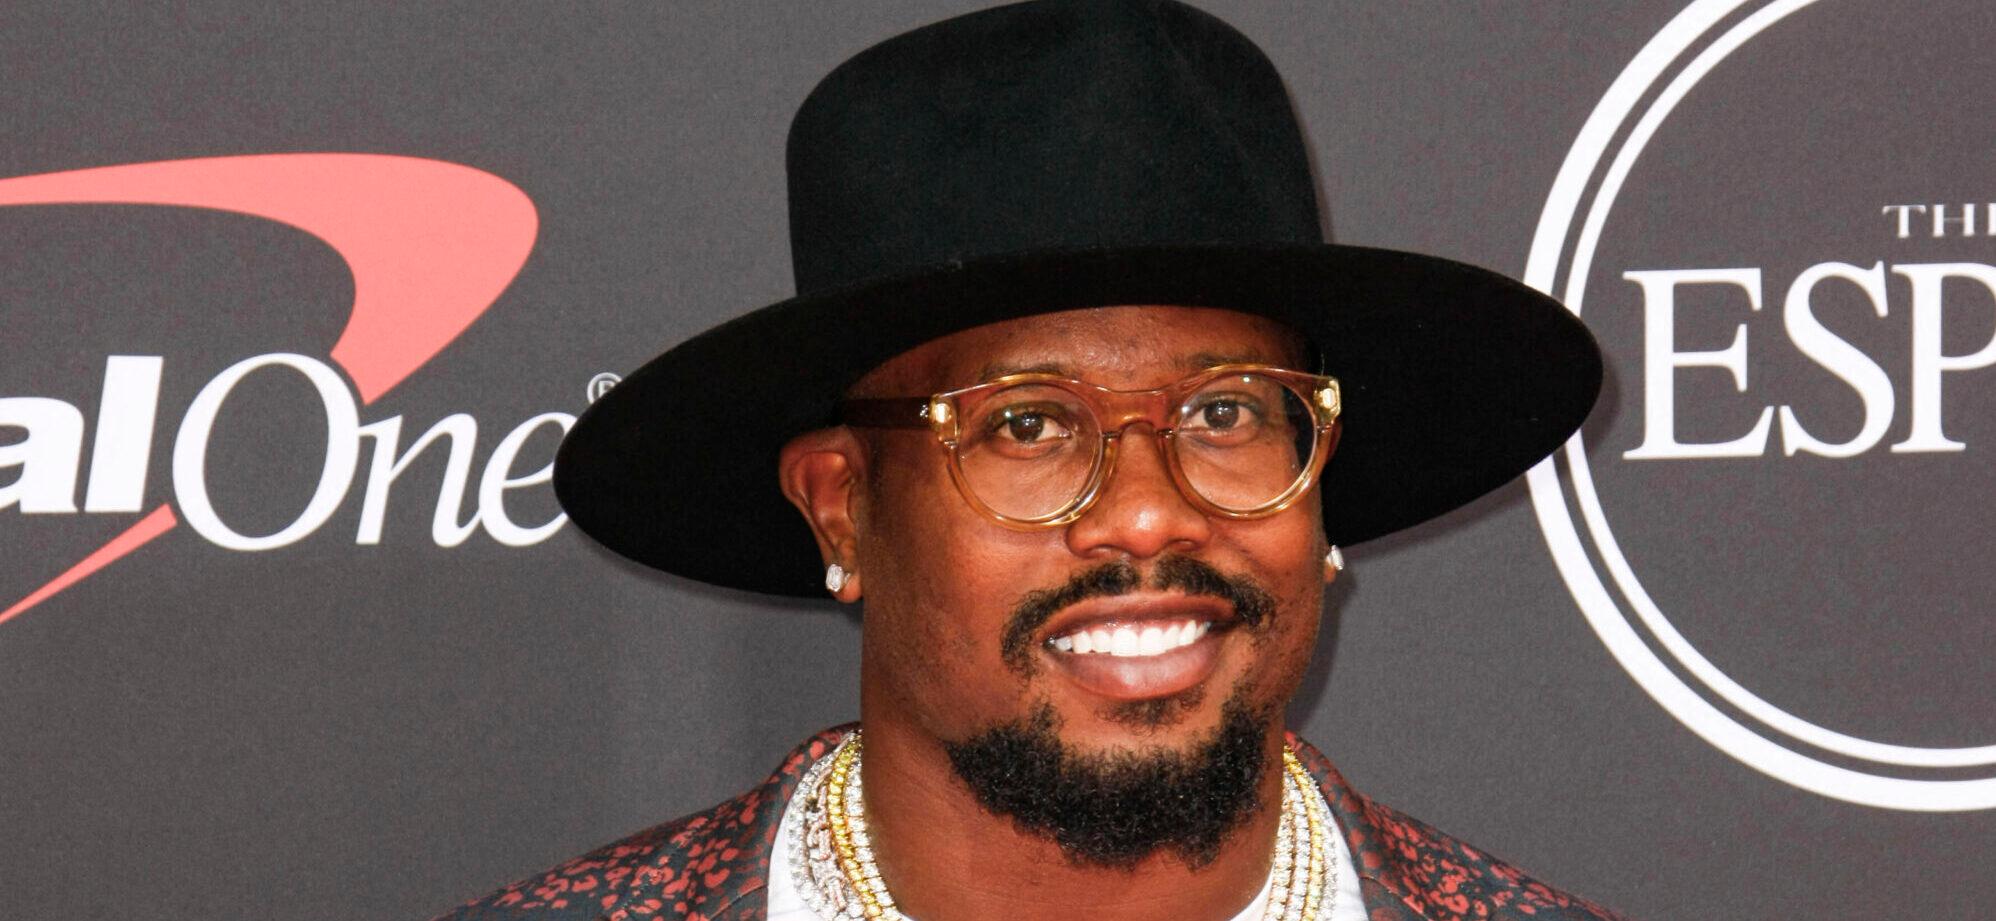 NFL's Von Miller Wanted For Alleged Assault On Pregnant Woman